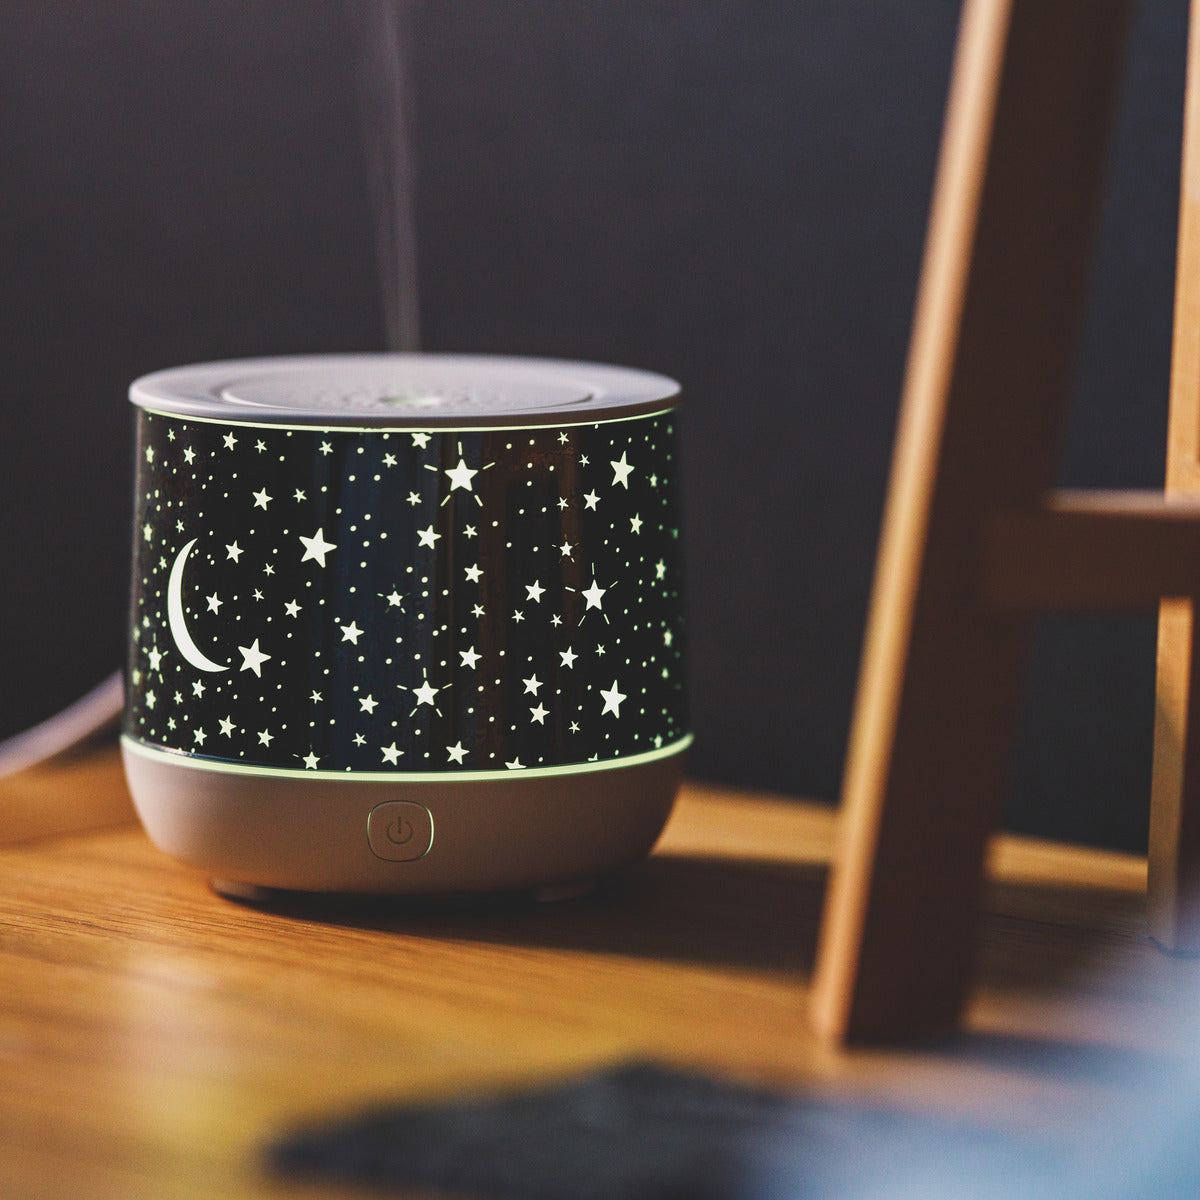 Dream Time Aroma Diffuser, Humidifier and Night Light